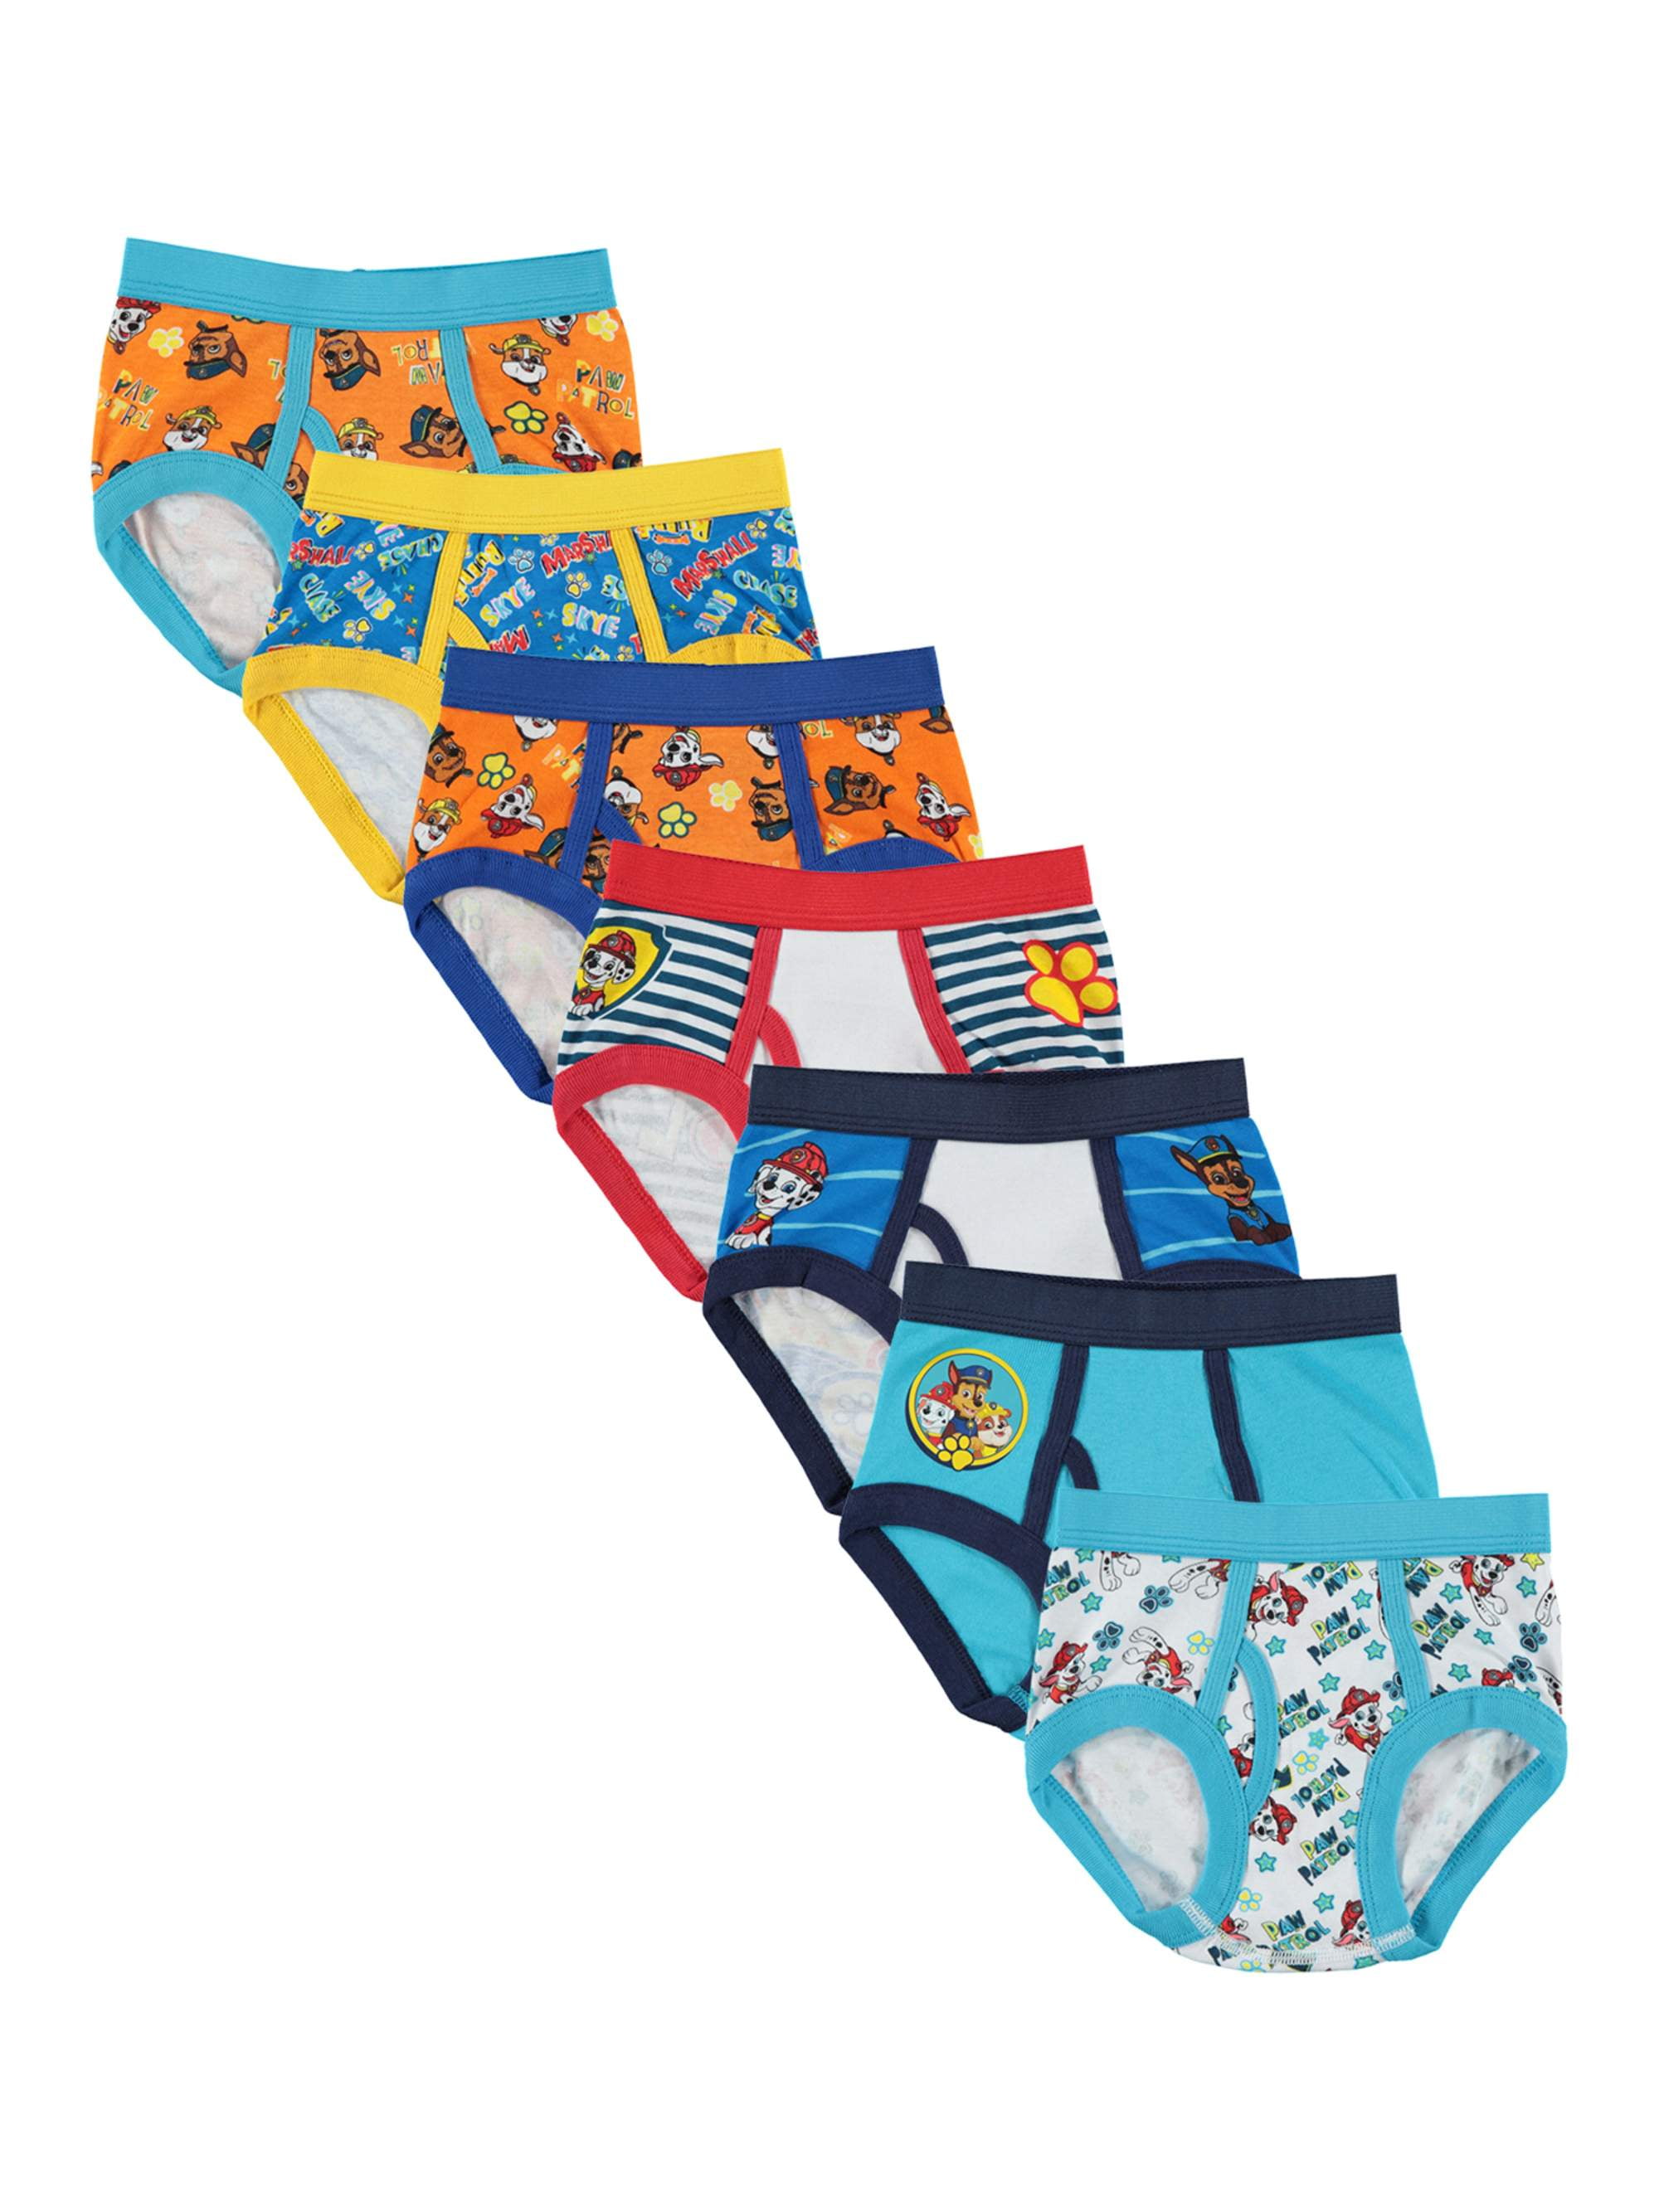 2-3 3-4 Pack of 3 Boys Cotton Pants/Briefs 4-5 Paw Patrol ages 1.5-2 